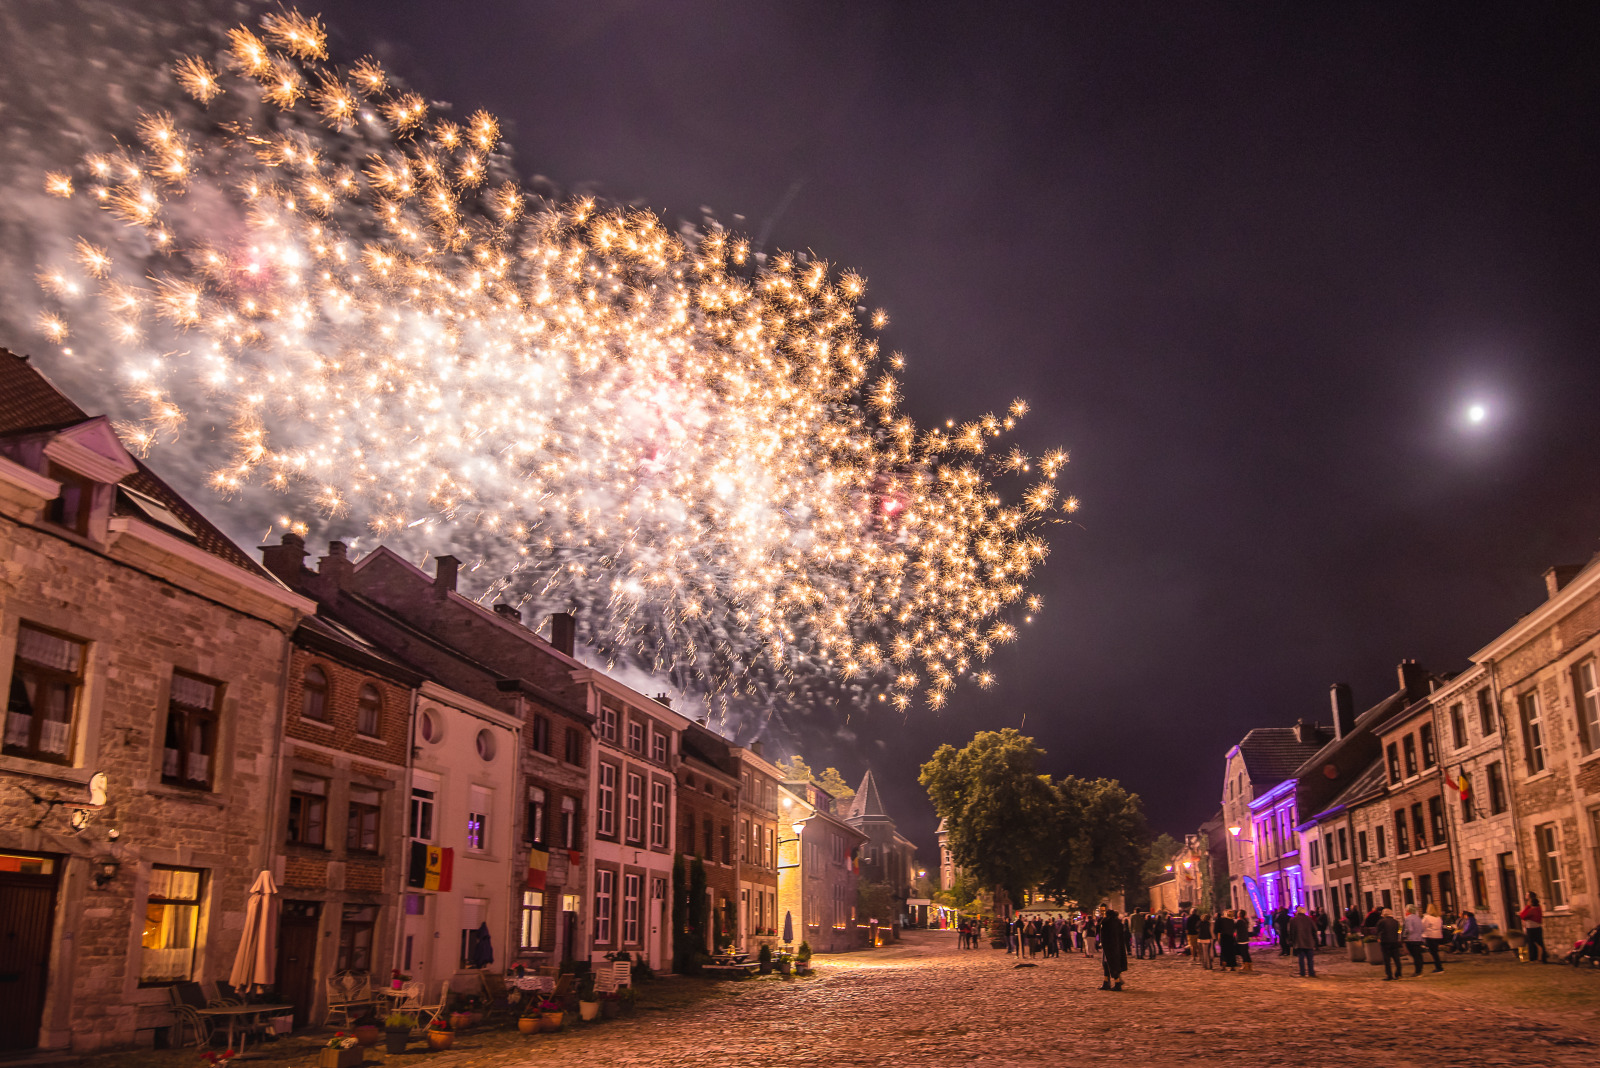 Fireworks above the village roofs